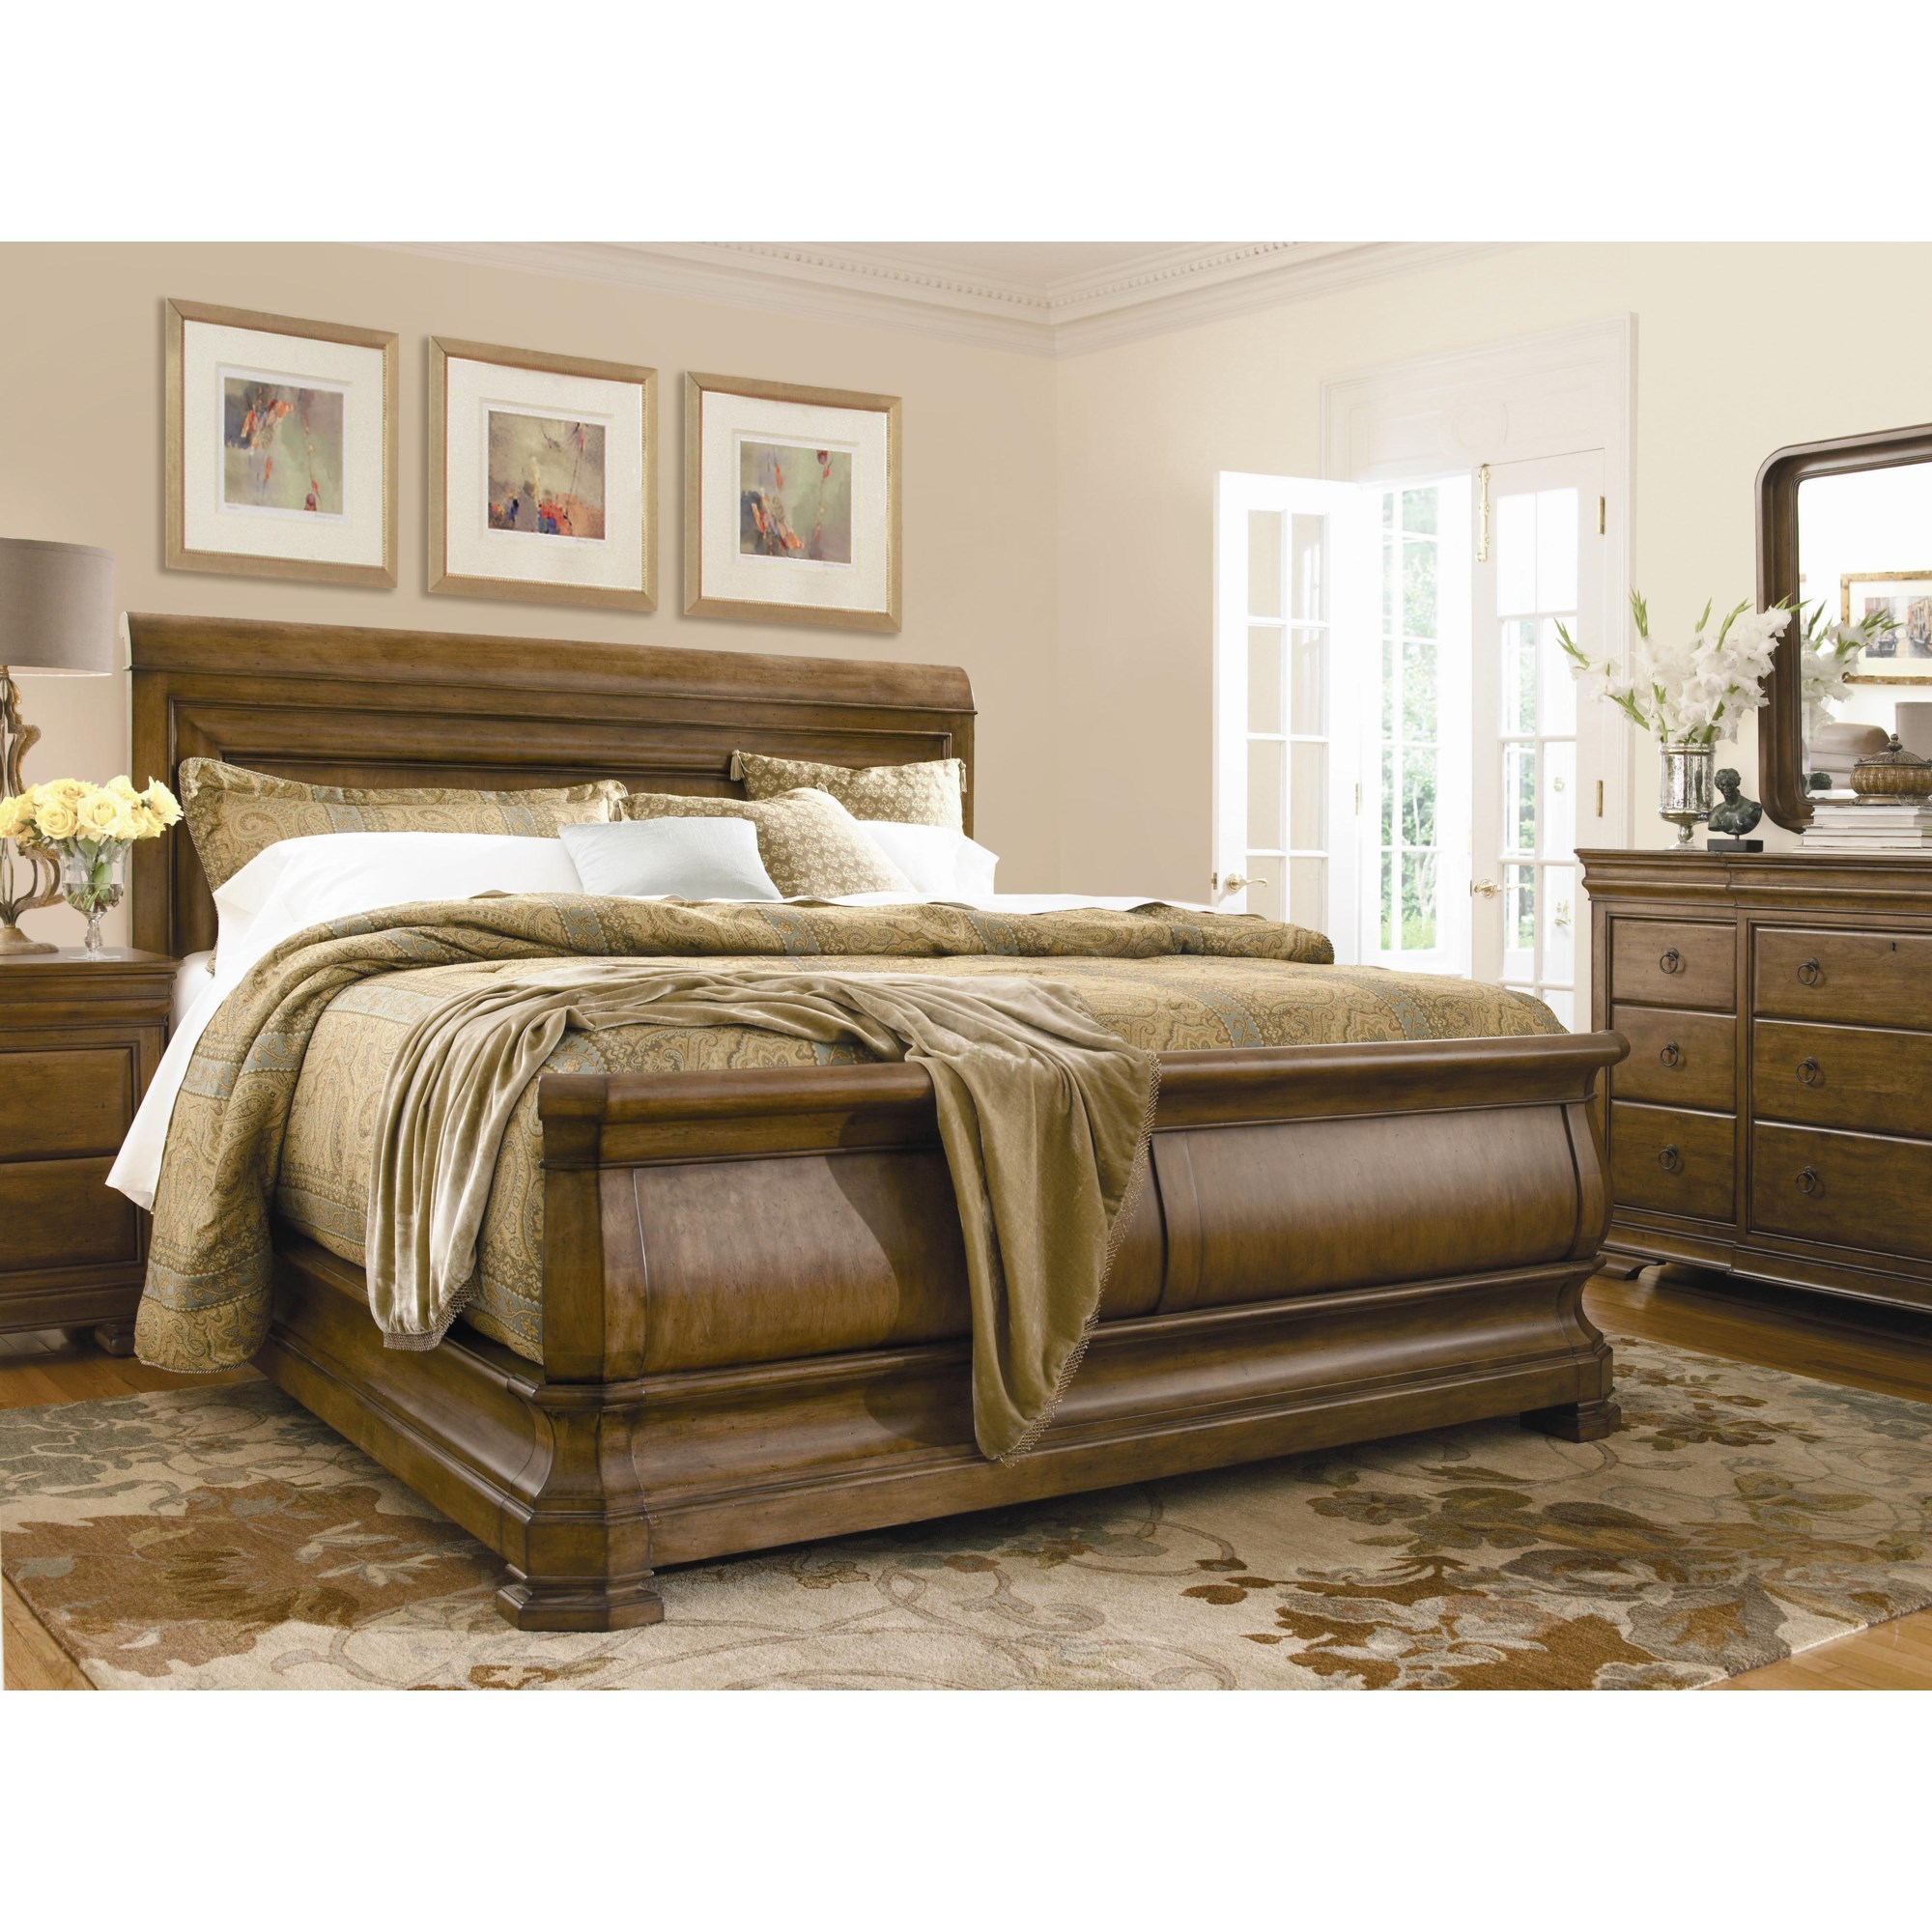 Universal New Lou PKG071766 Traditional King Sleigh Bed, Belfort Furniture